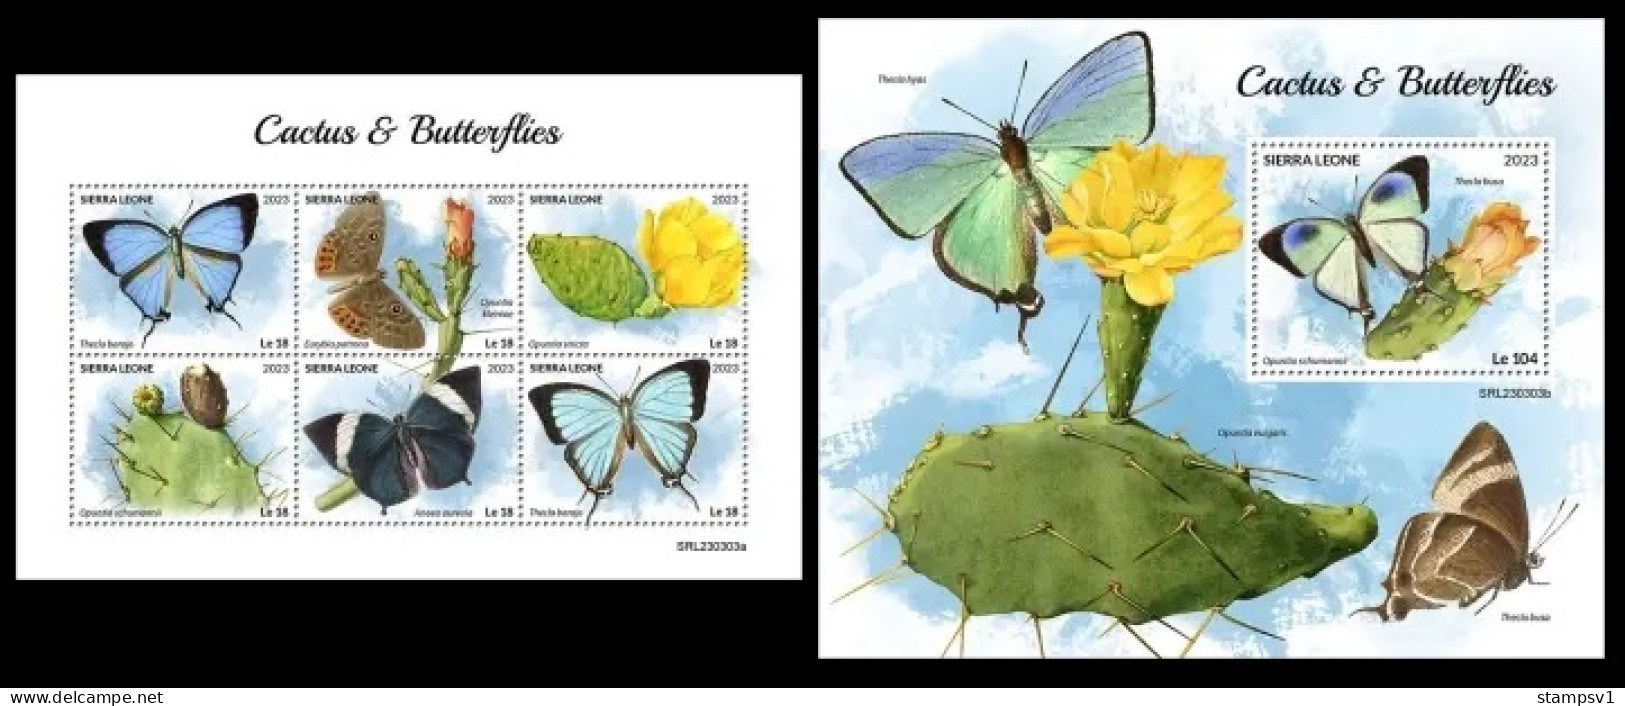 Sierra Leone  2023 Cactus & Butterflies. (303) OFFICIAL ISSUE - Cactusses